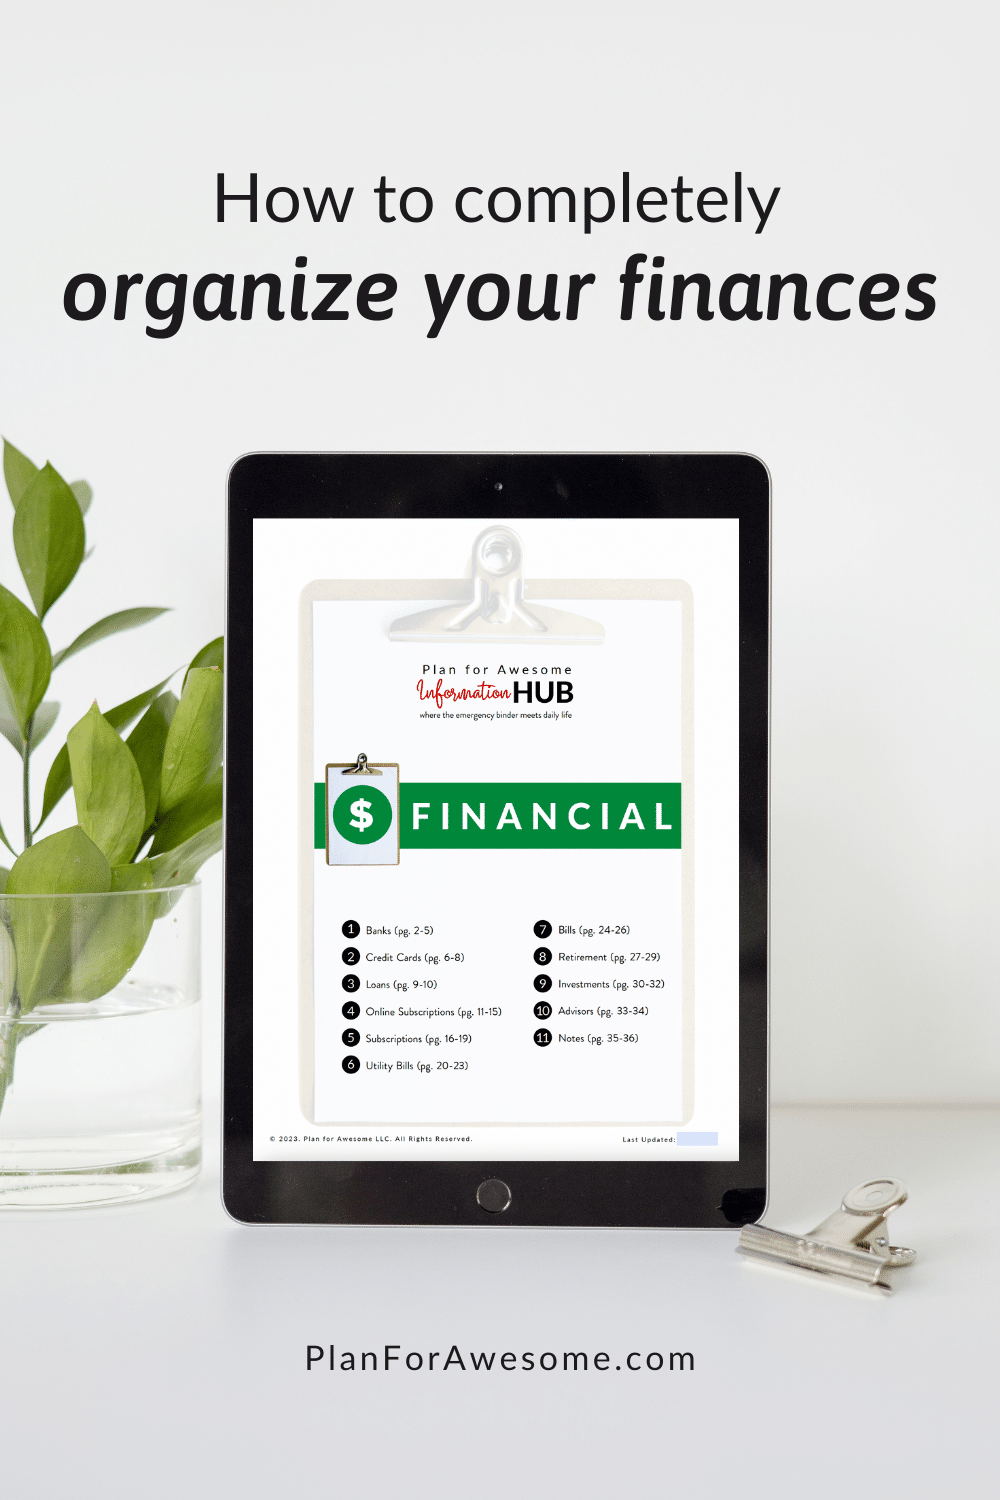 1 Simple Way to Organize Your Financial Information